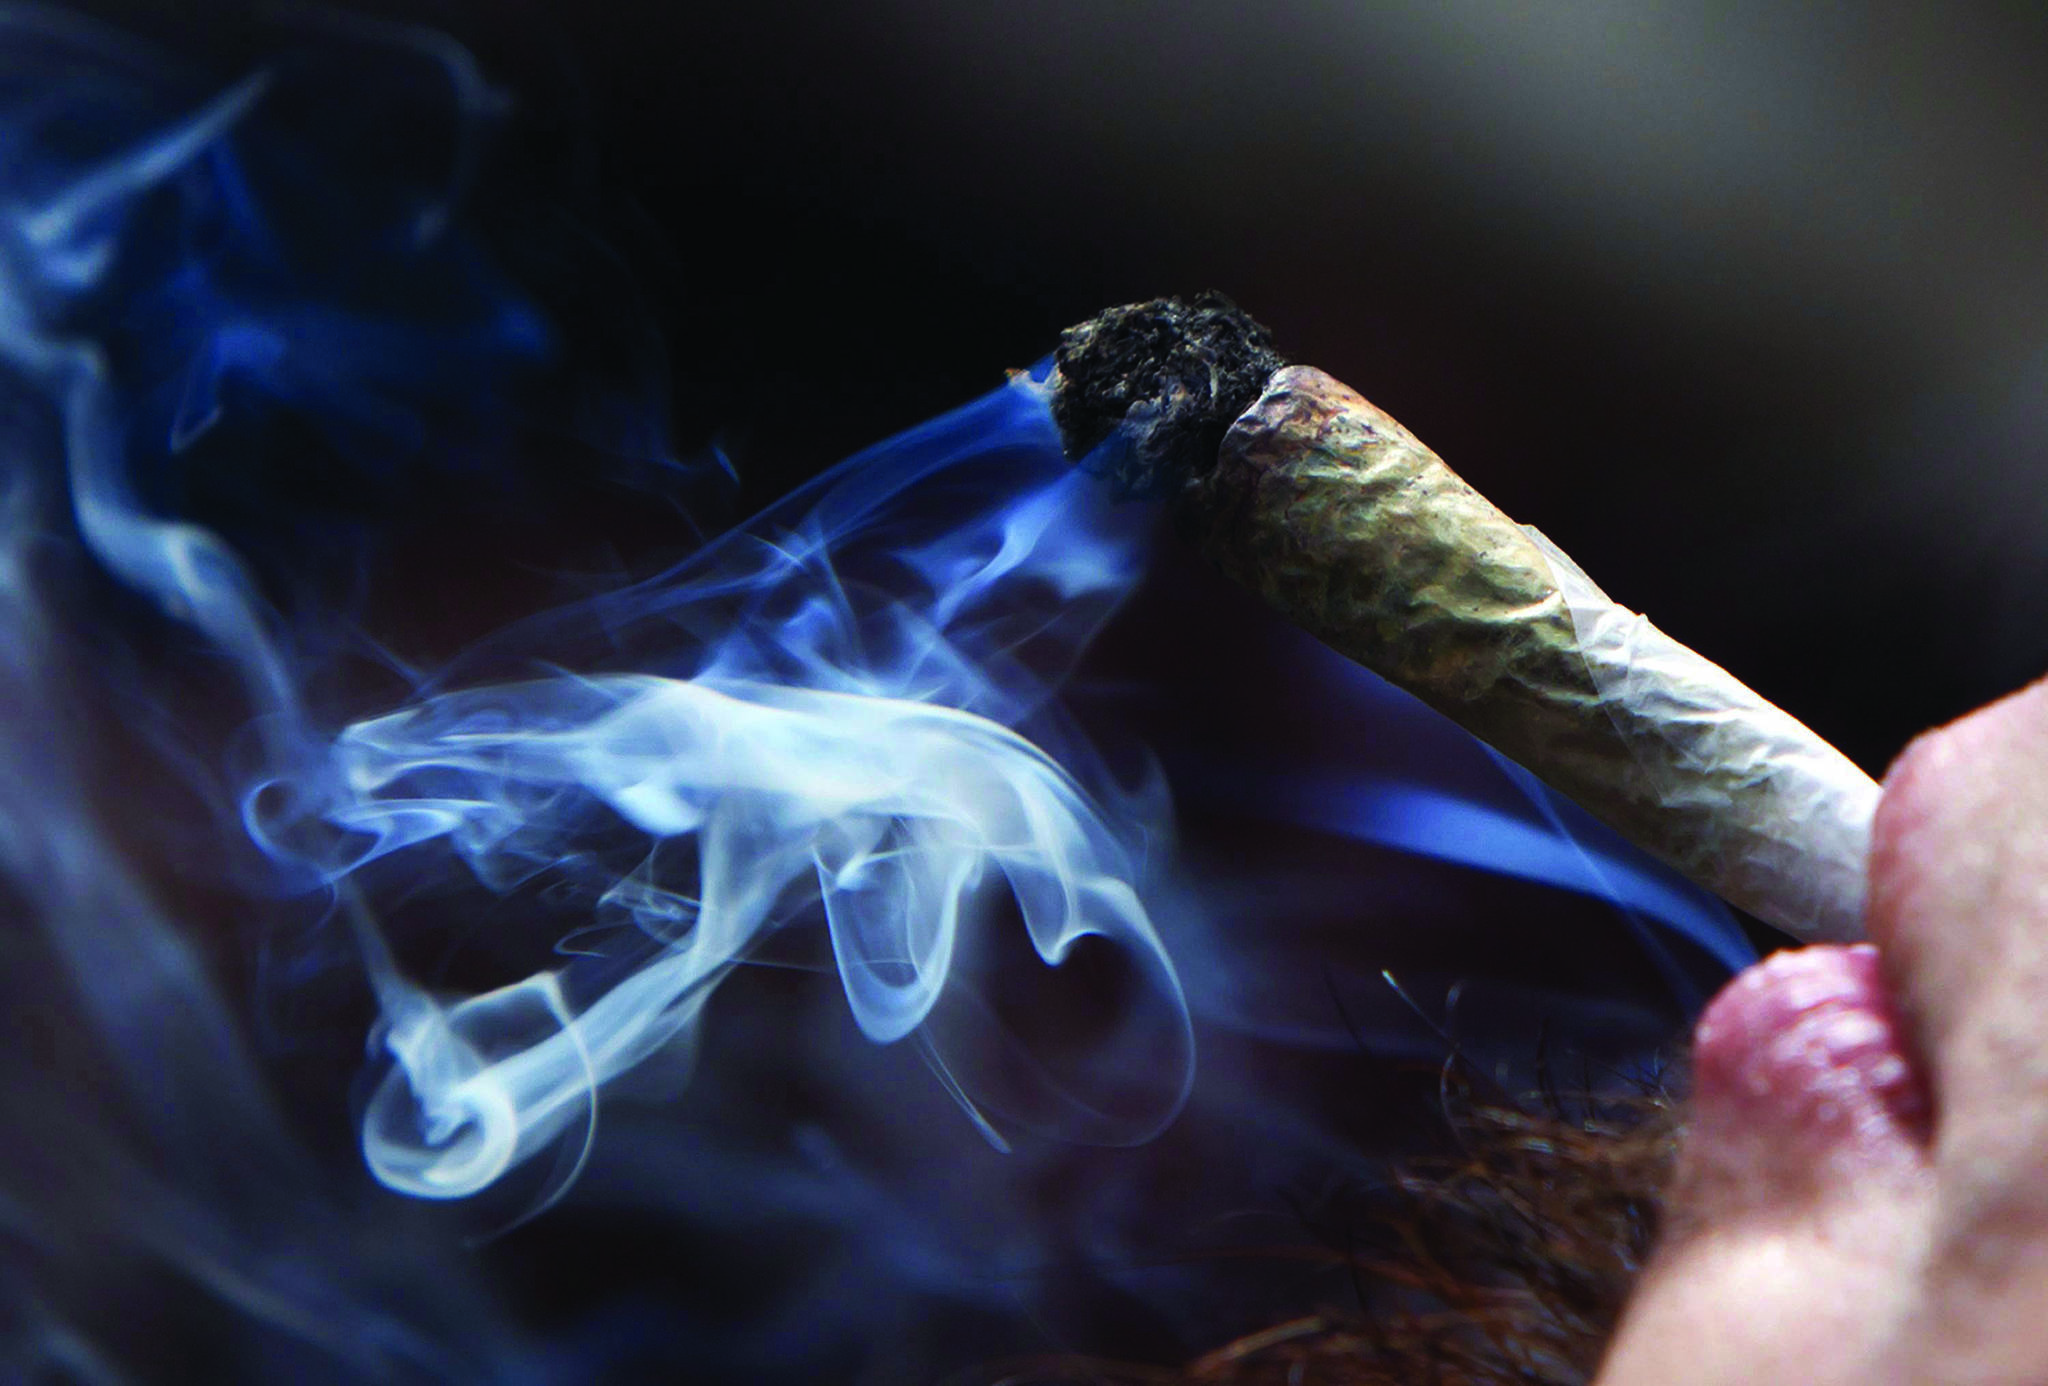 The majority of cannabis users smoke the drug, as opposed to eating or vaping it, a Statistics Canada survey has found. (Darryl Dyck /The Canadian Press)